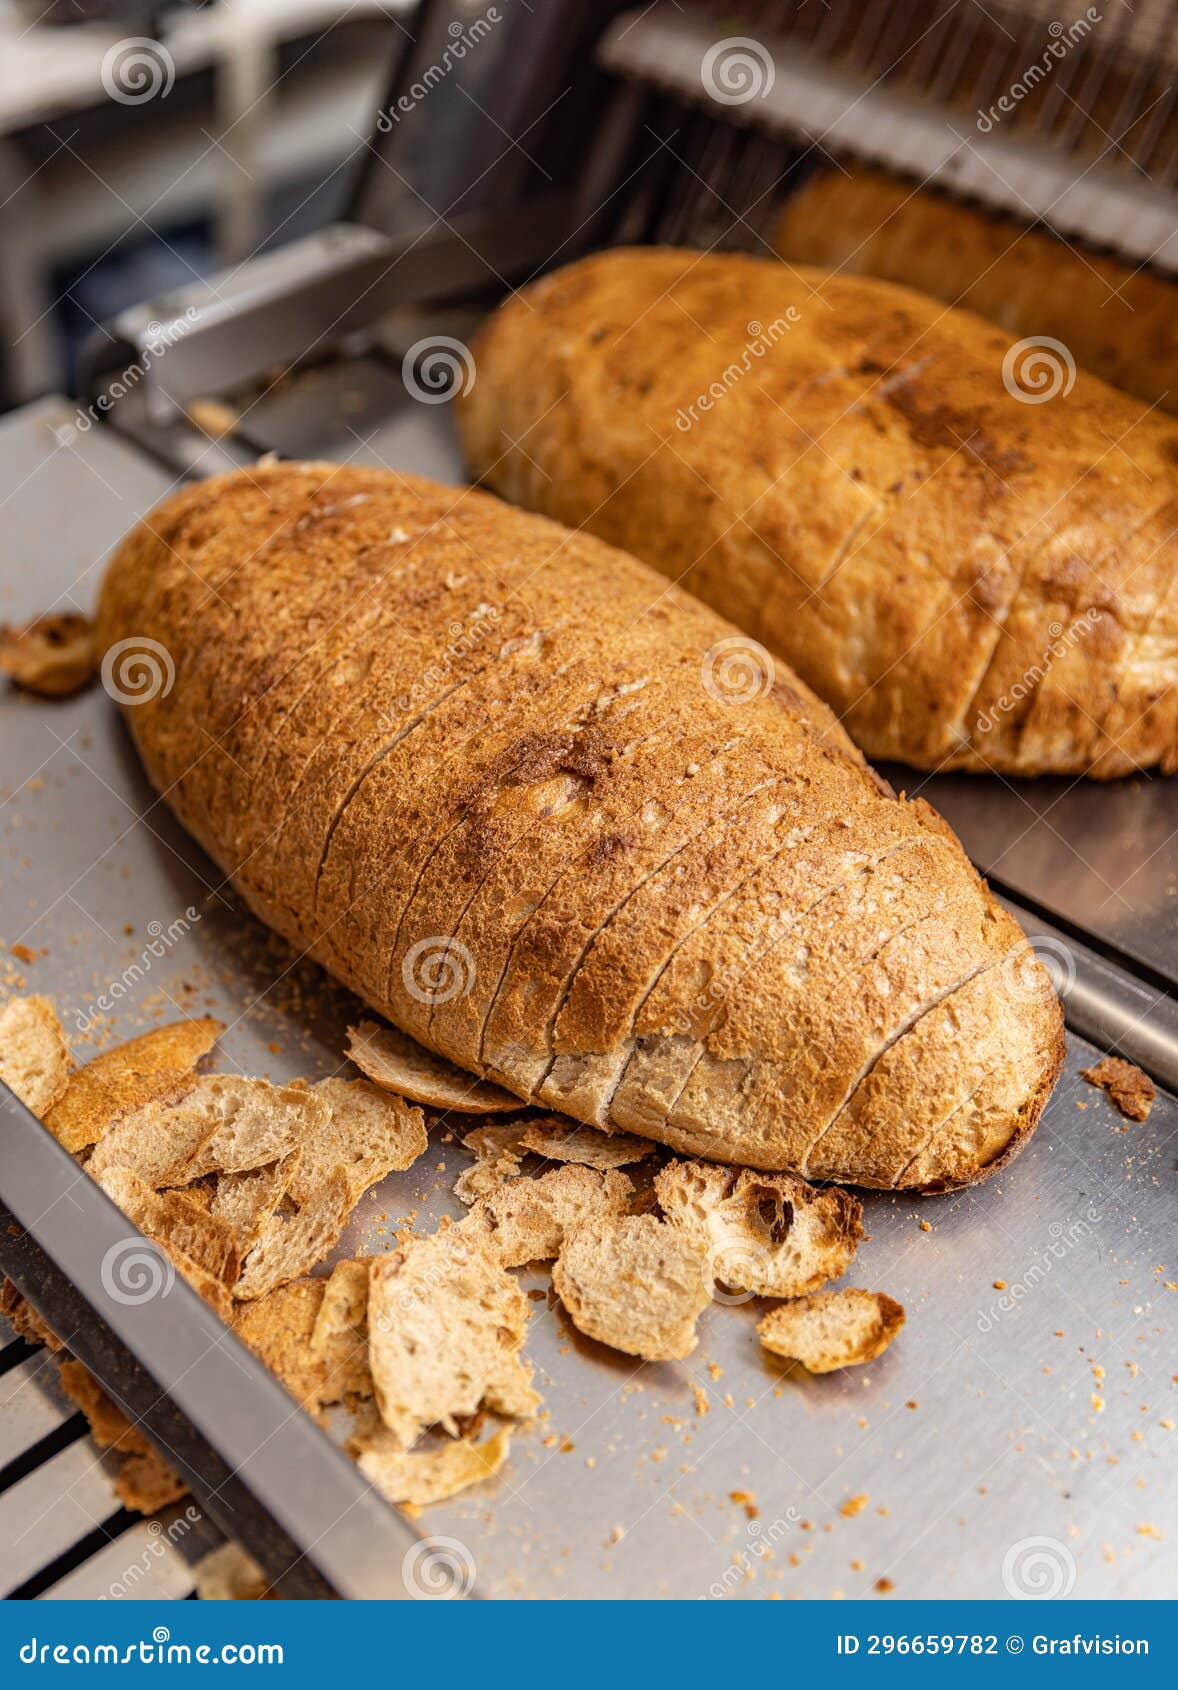 https://thumbs.dreamstime.com/z/sliced-bread-production-line-slicing-machine-food-bakery-products-296659782.jpg